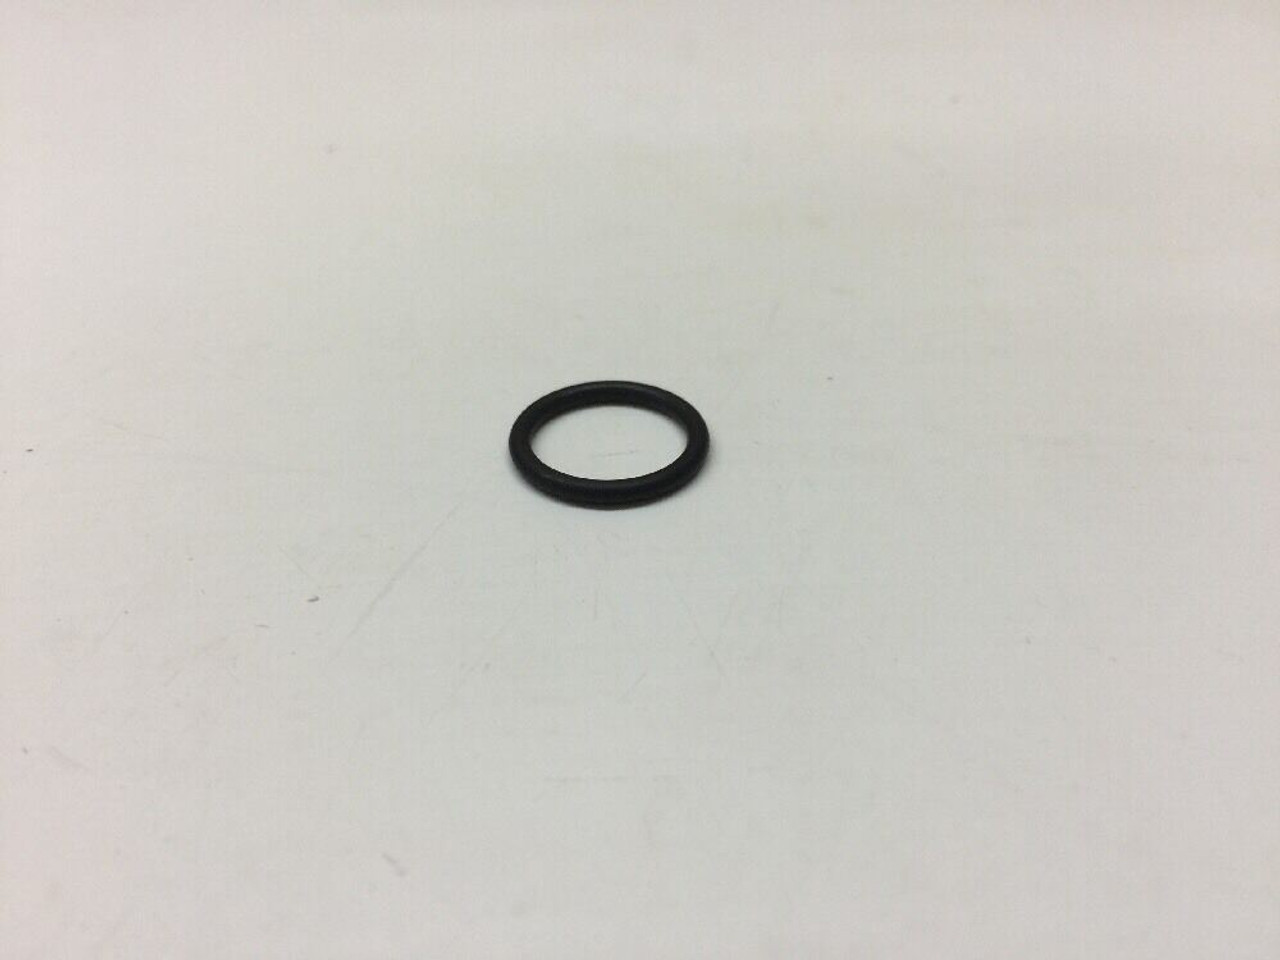 O-Ring M83461/1-014 SAE Black Rubber C-5 F-16 Aircraft Lot of 10